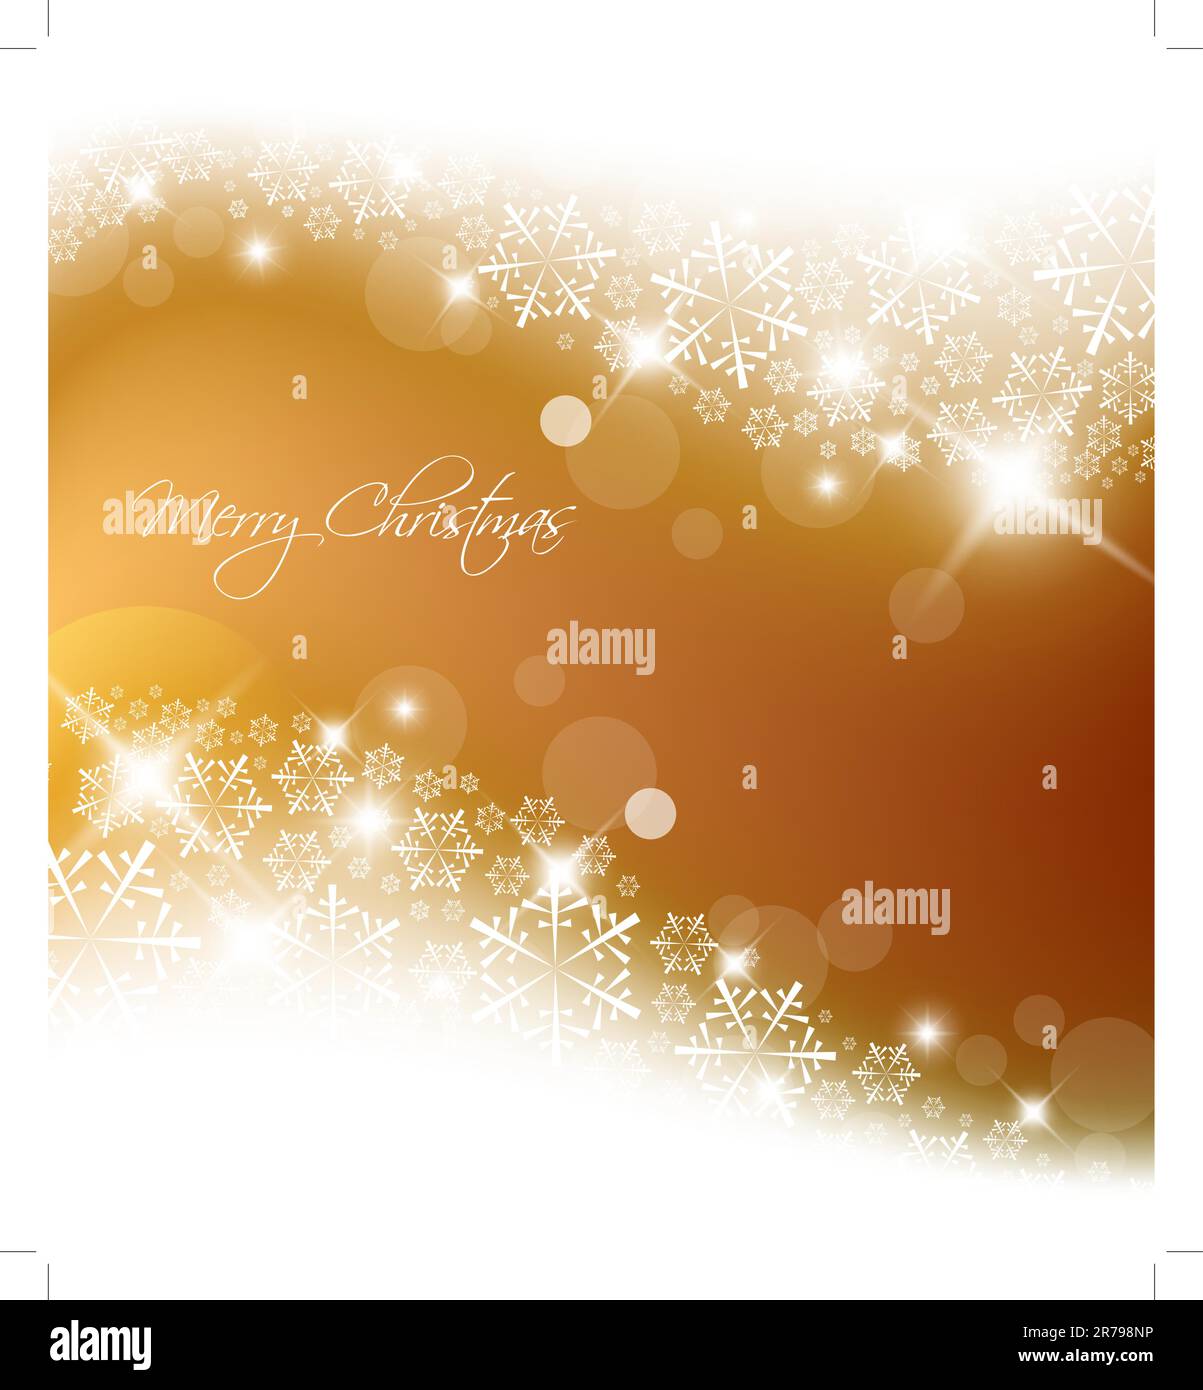 Golden abstract Christmas background with white snowflakes Stock Vector